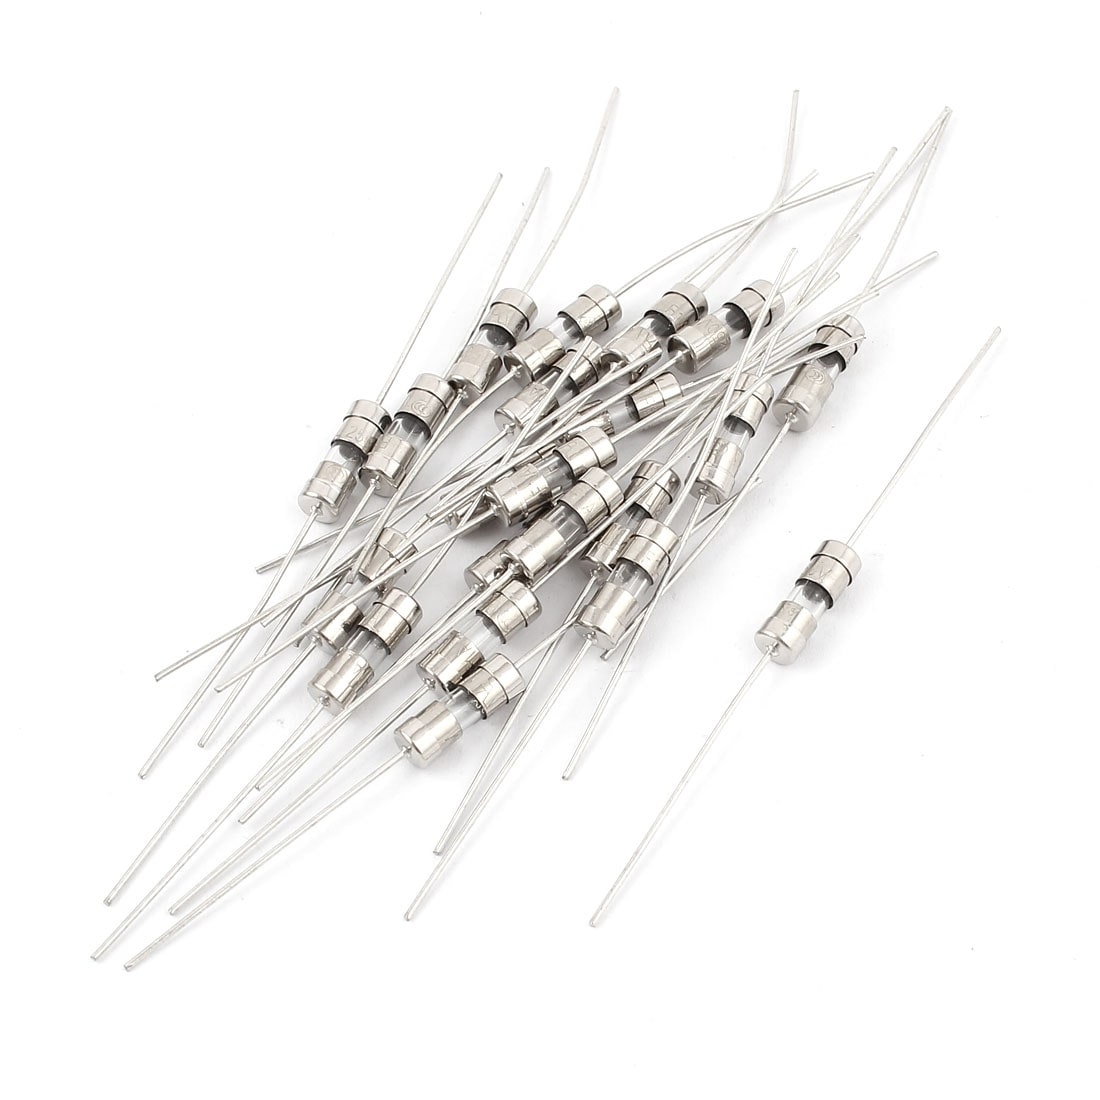 20pcs AC 250V 1A 4x11mm Fast-blow Acting Axial Lead Glass Fuse Tube 6.5cm Length - Clear, Silver Tone